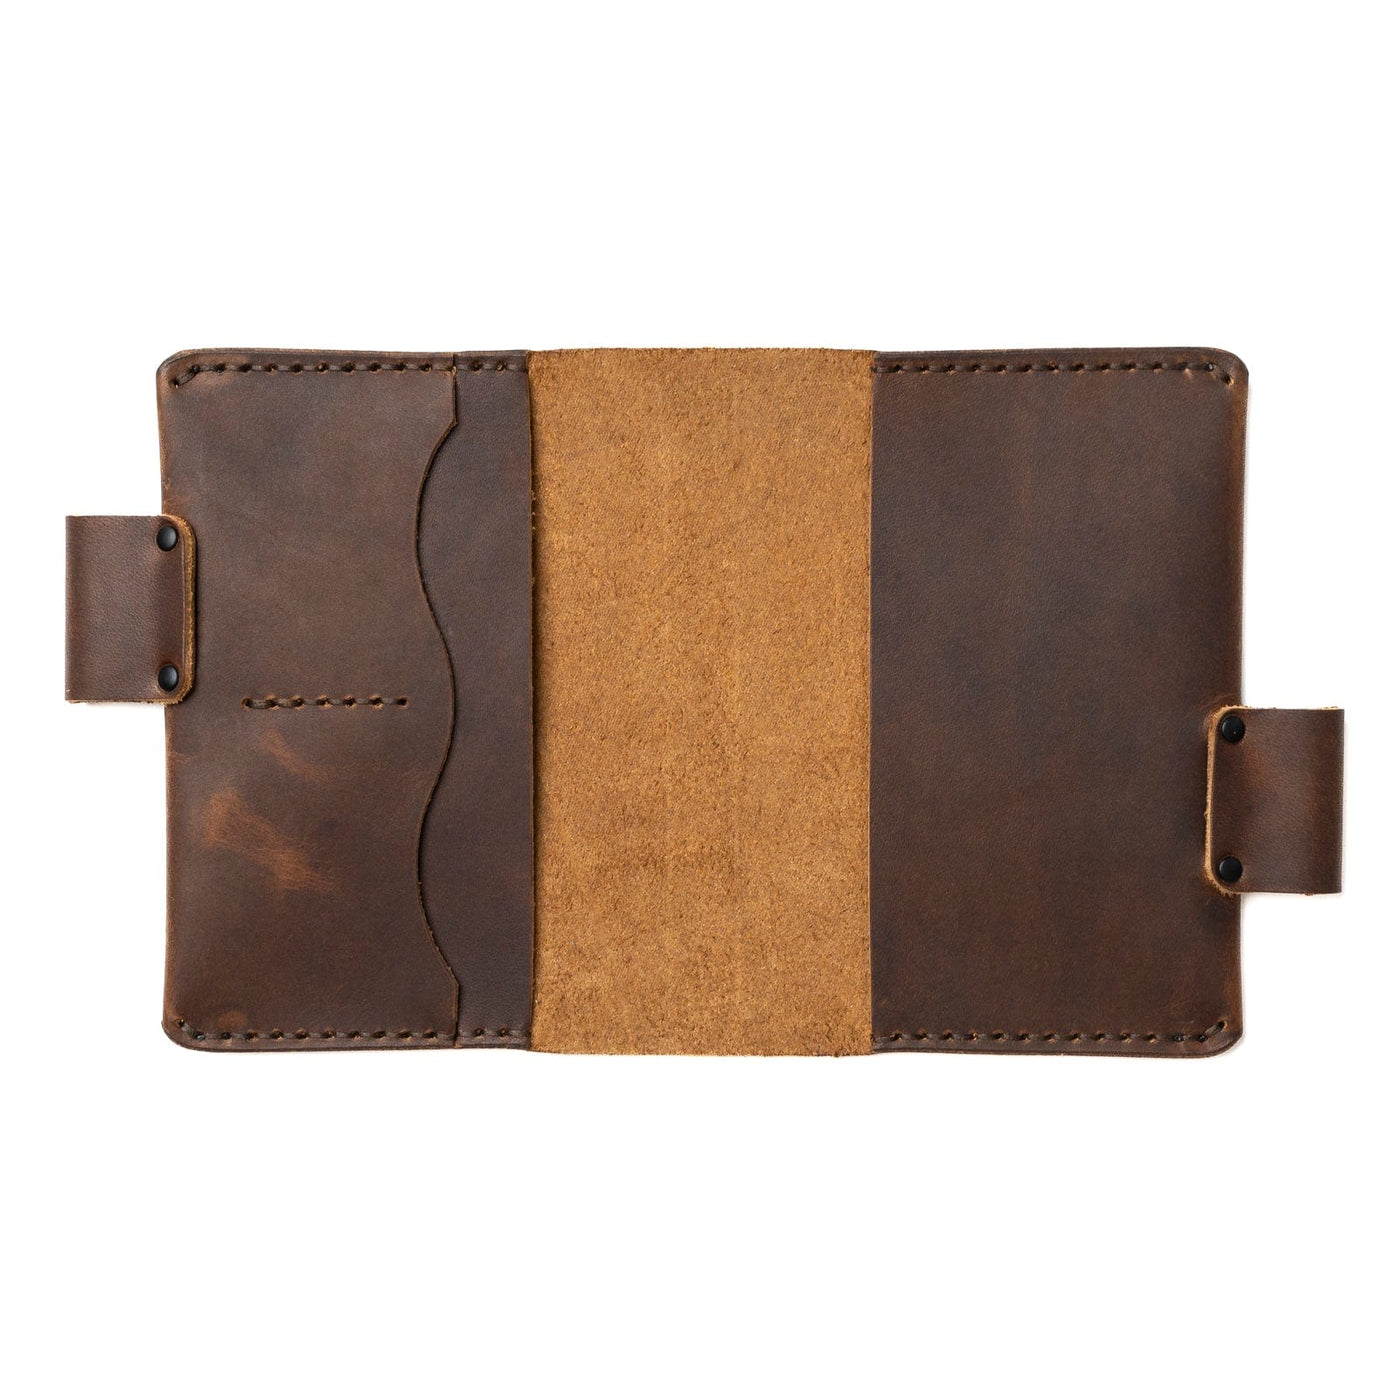 Leather Midori MD A6 Notebook Cover - Heritage Brown Popov Leather